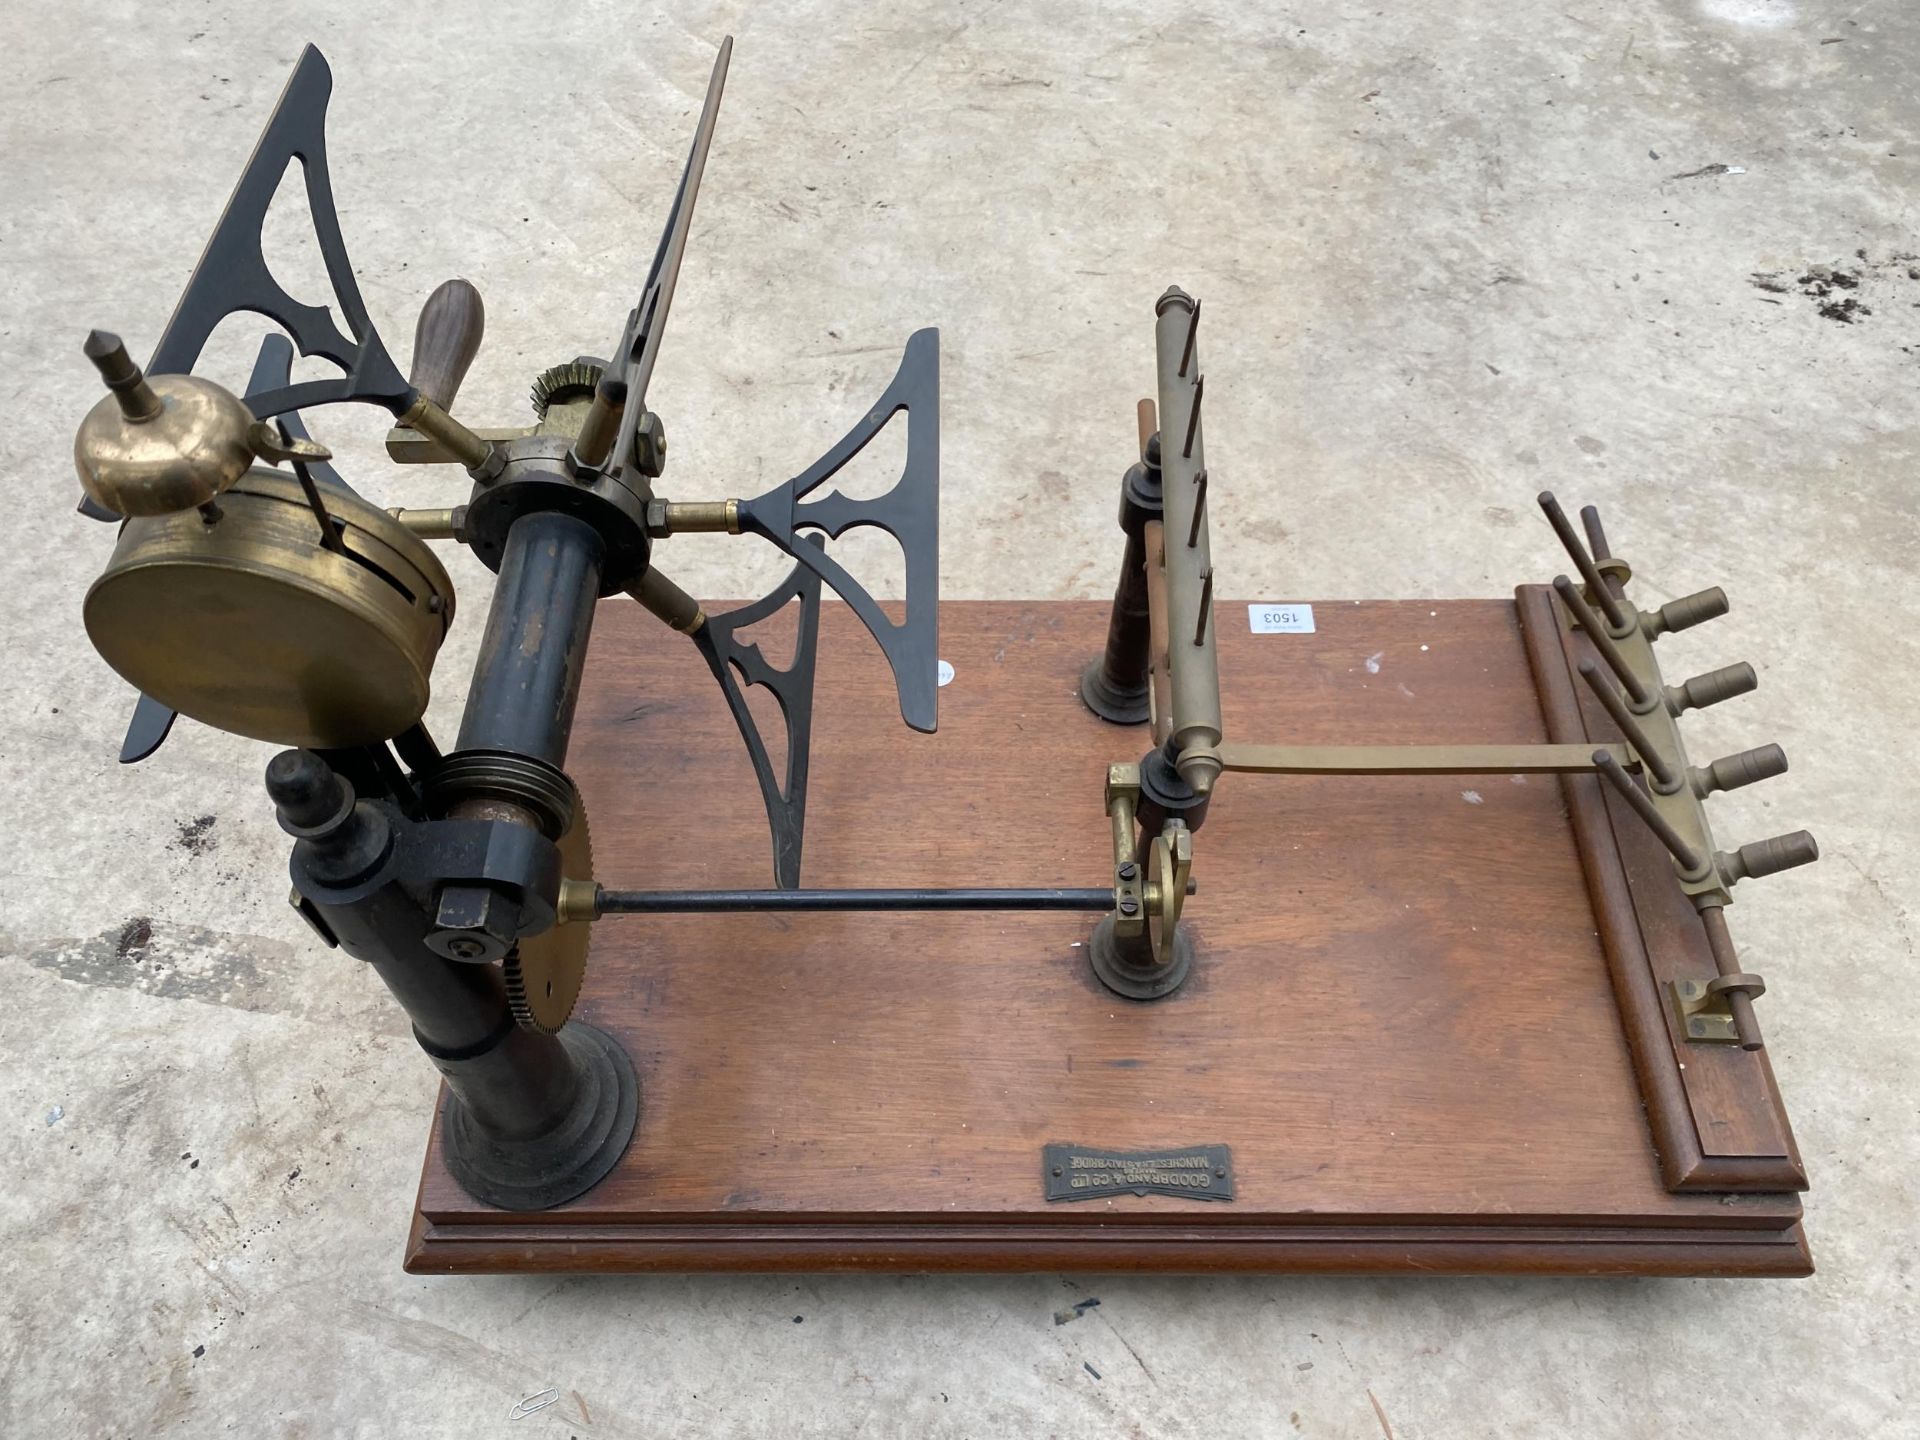 A VINTAGE INDUSTRIAL SCRATCH BUILT YARN SPINNING MACHINE BEARING THE NAME GOODBRAND & CO LTD - Image 8 of 8